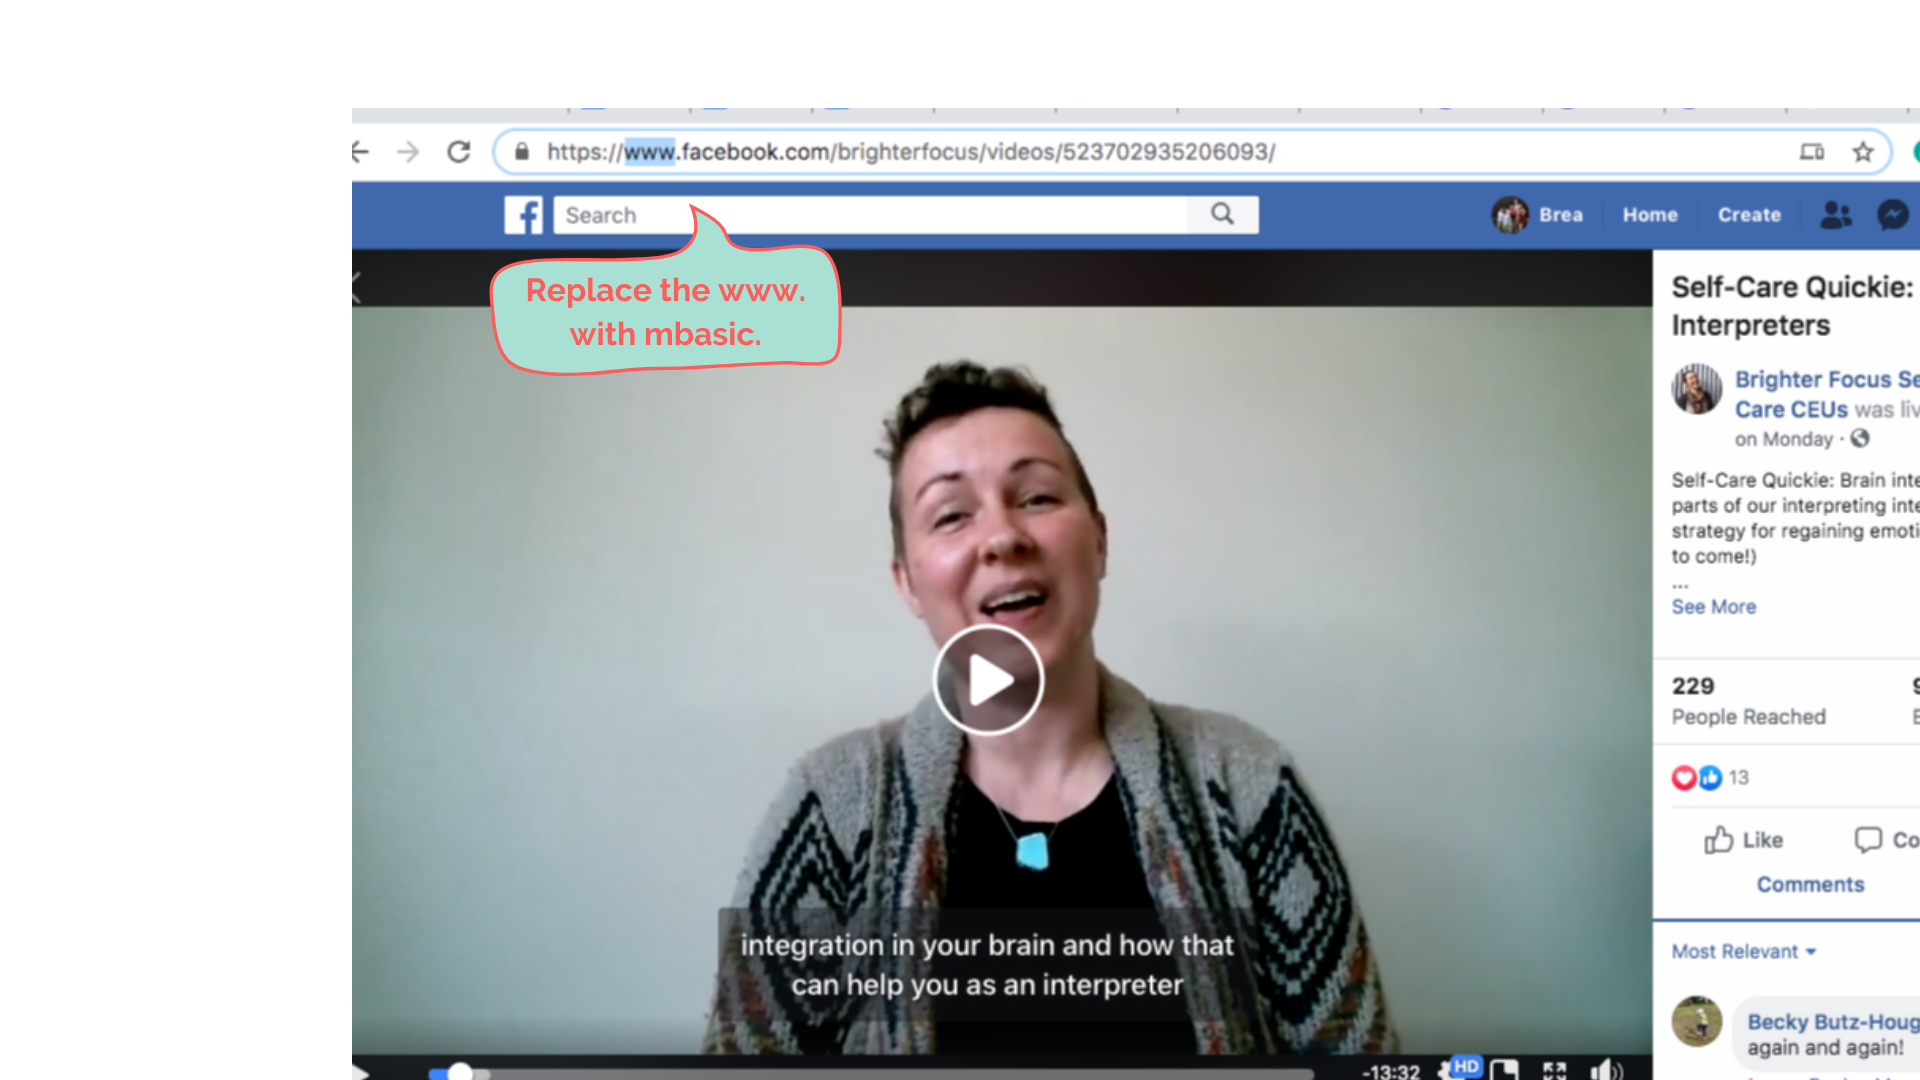 ID: Facebook Live video example with a woman on screen. URL has www. highlighted. Tags: add subtitles to videos, captions, interpreter